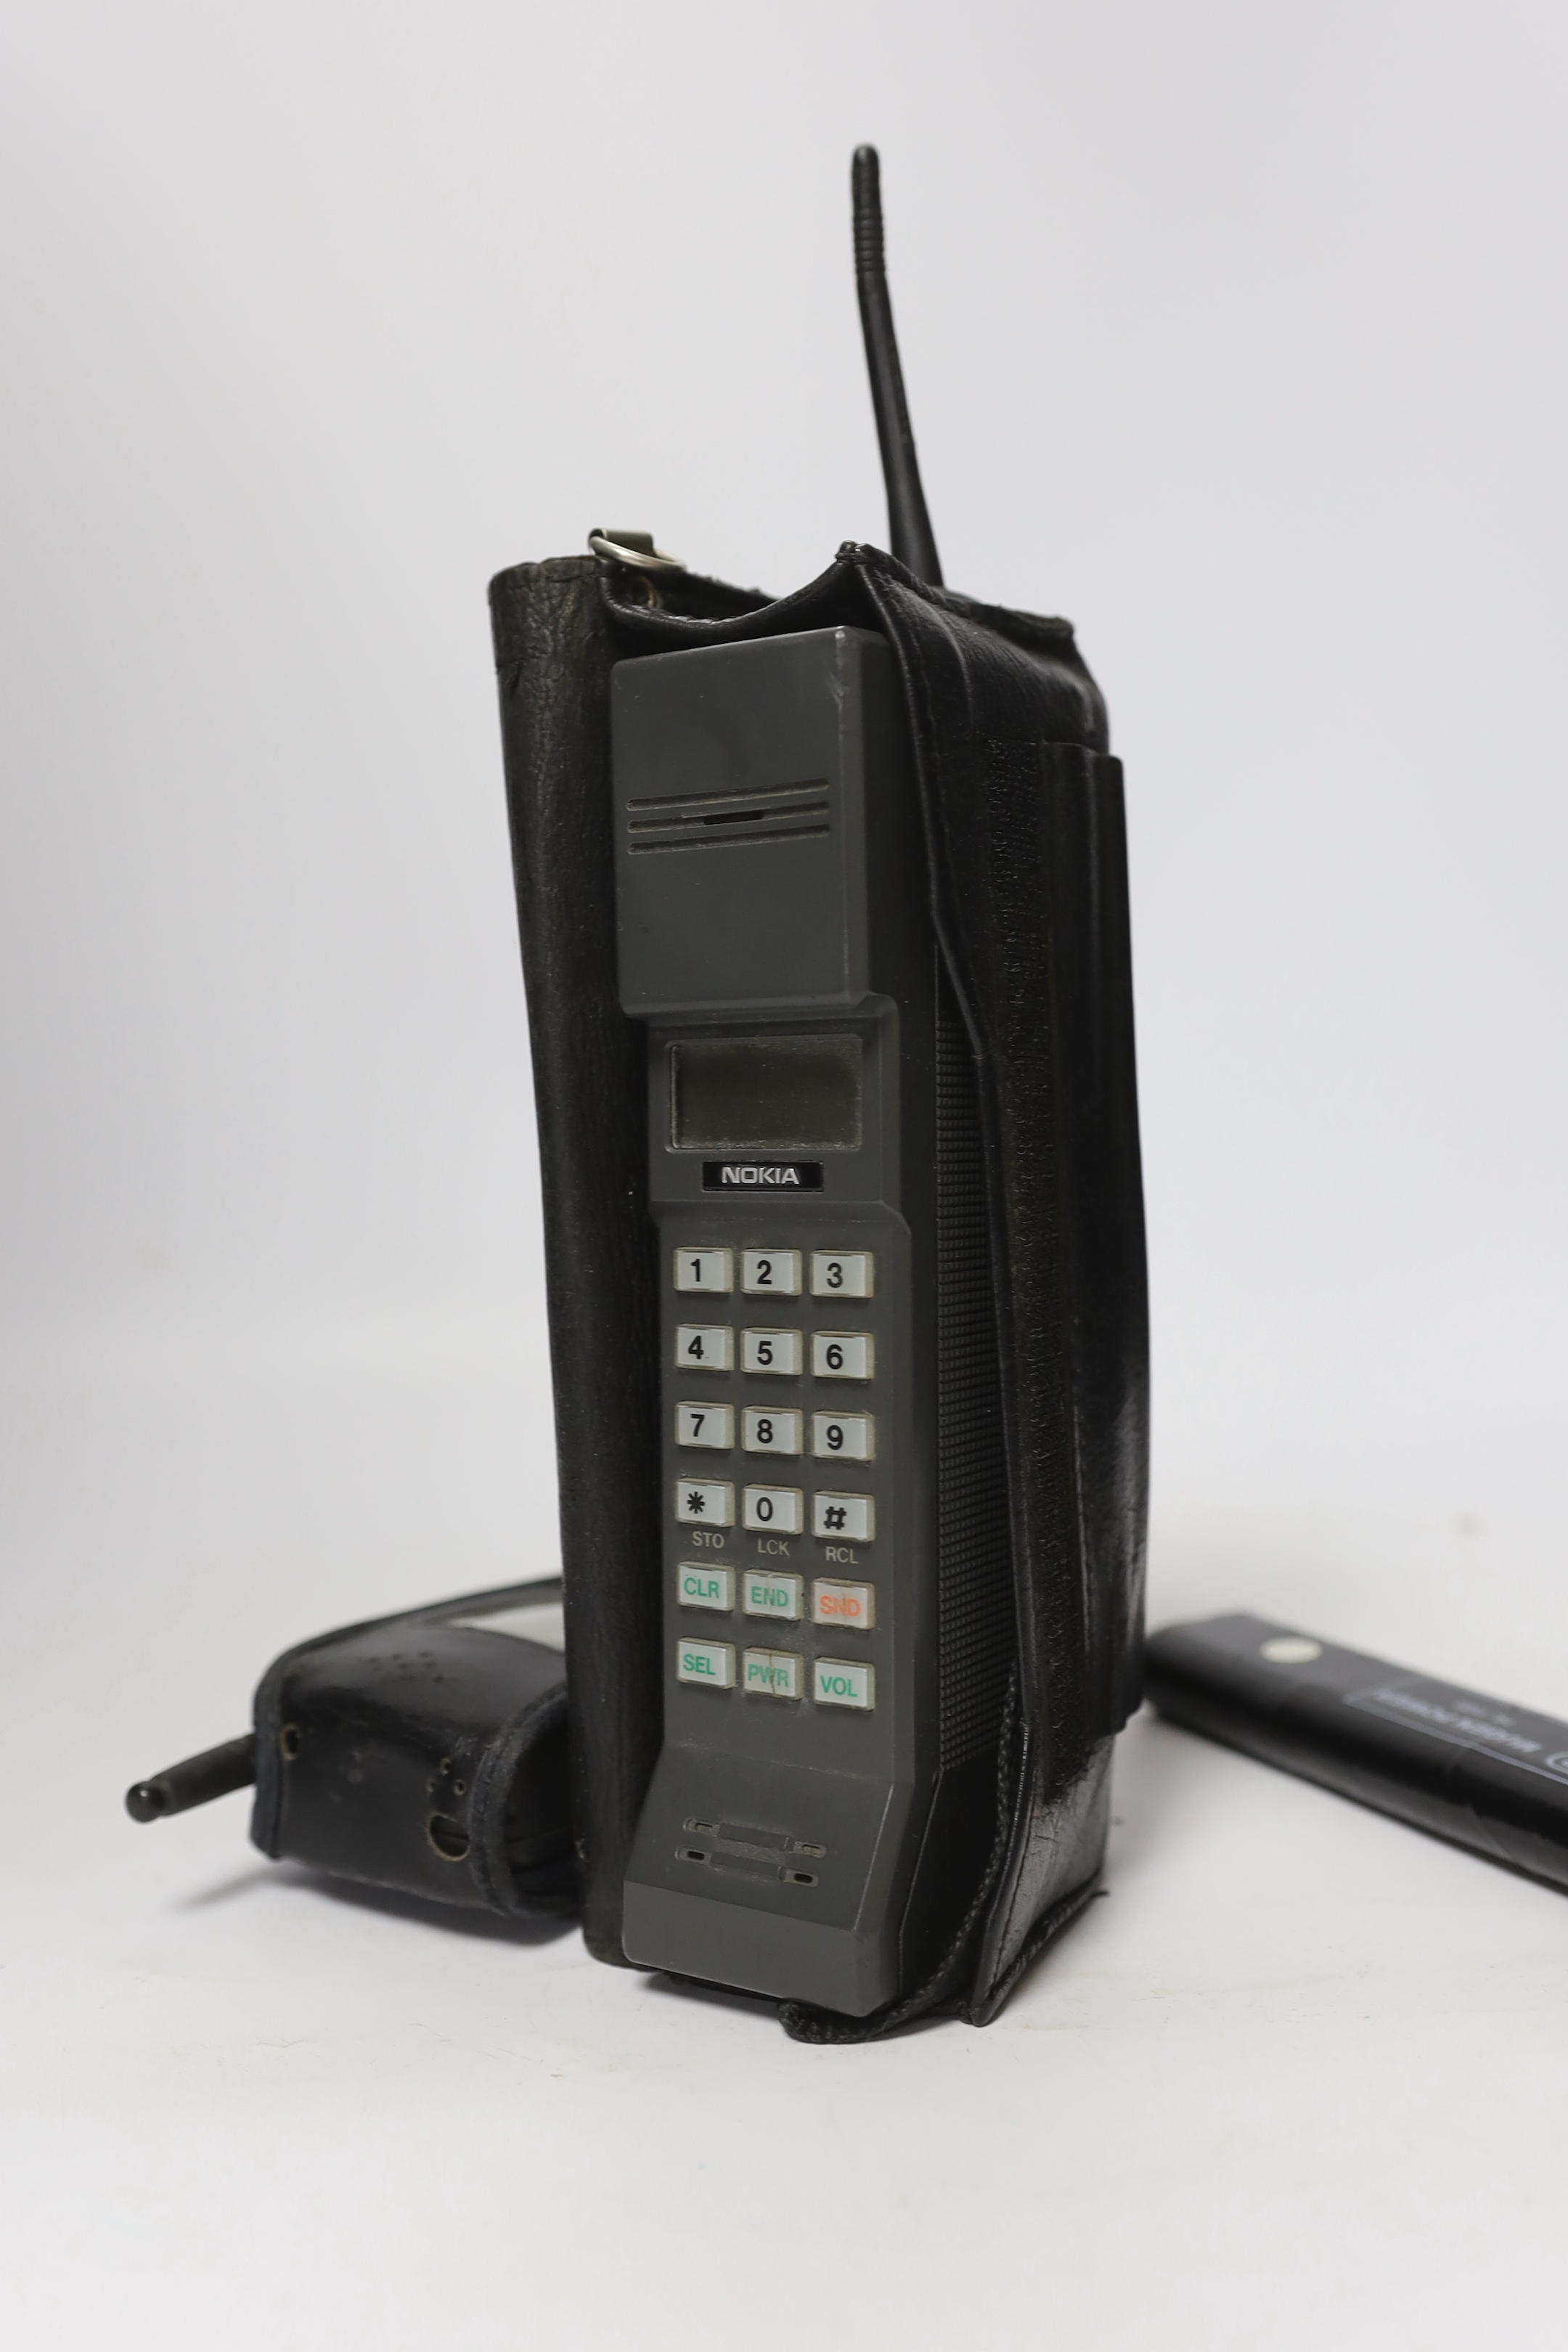 Two early Nokia mobile phones; a late 1980s Cityman 1320 ‘brick’ style analogue phone and a mid-1990s 2110 style GSM phone produced for Orange